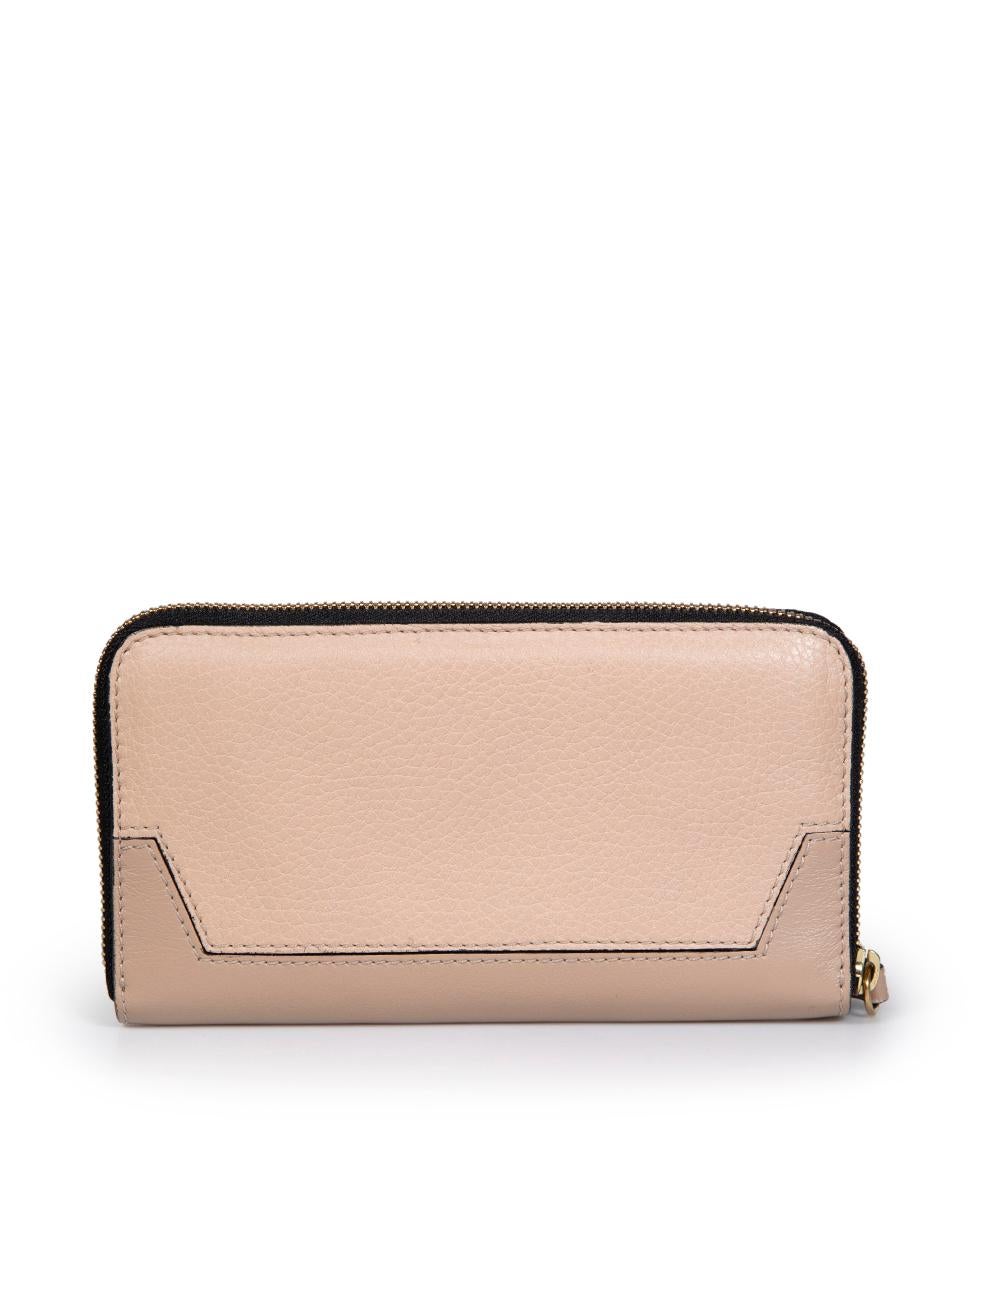 Burberry Pink Leather Nova Check Continental Wallet In Excellent Condition For Sale In London, GB